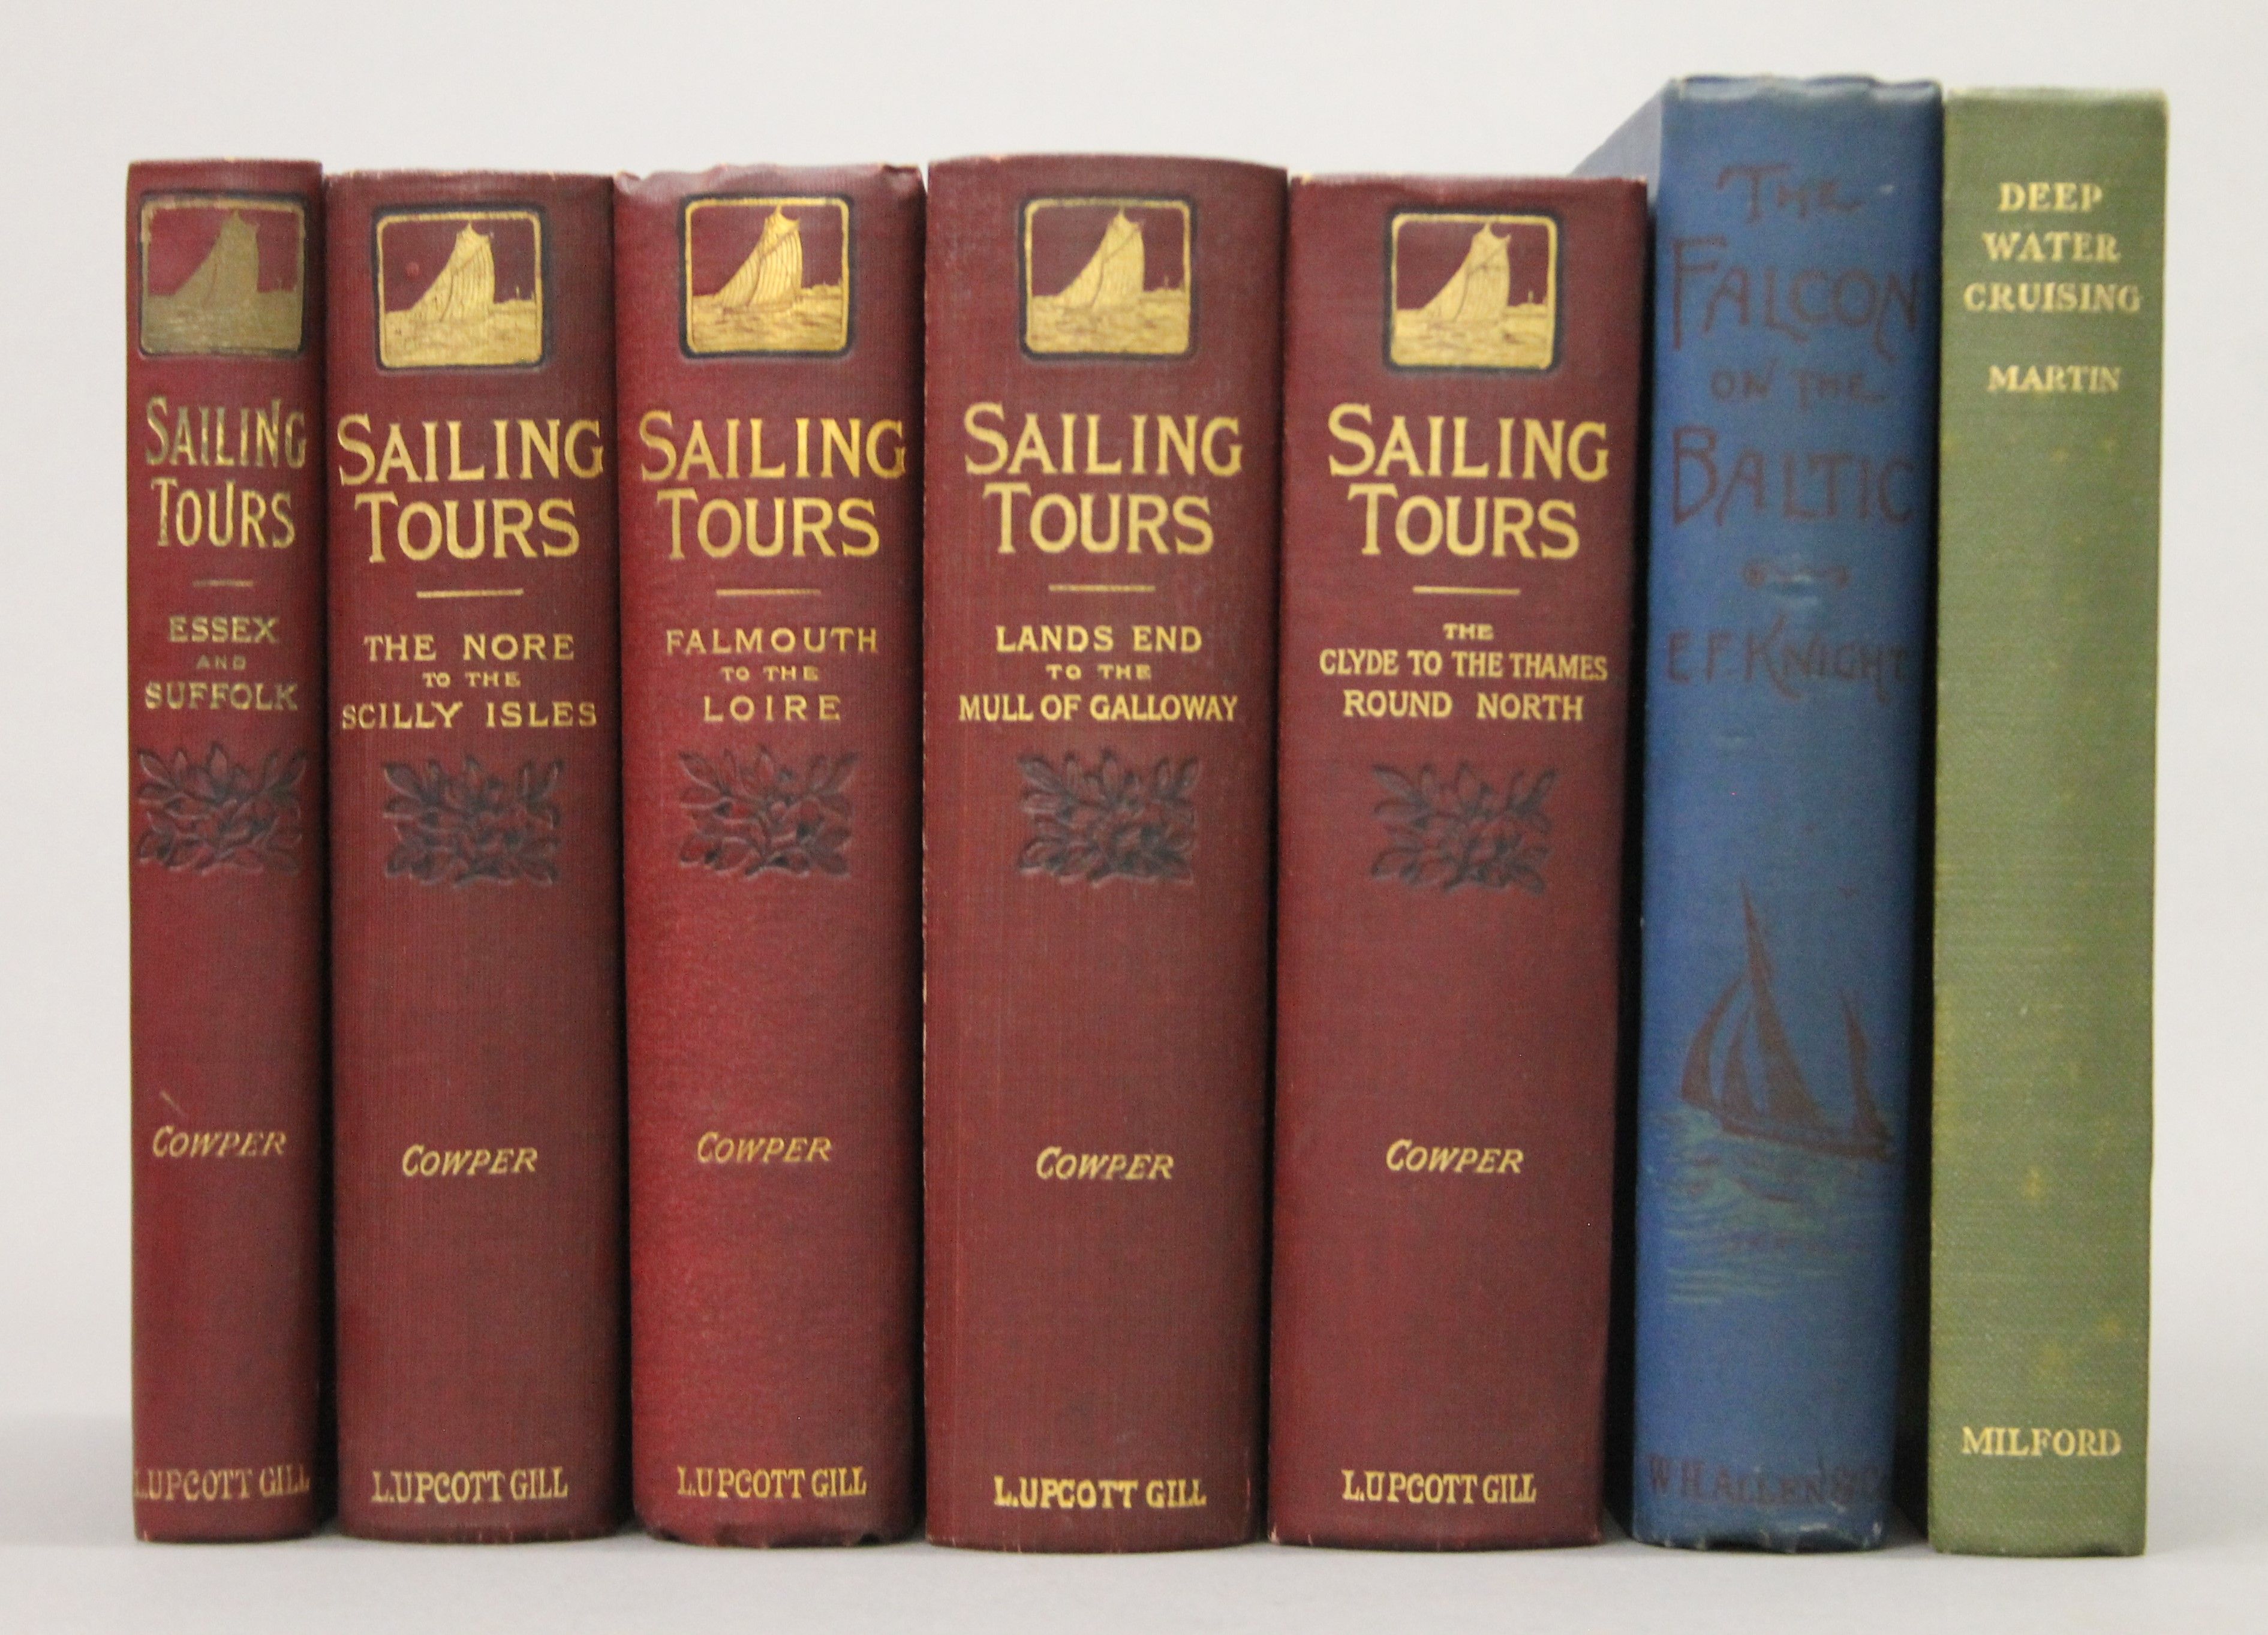 Cowper (Frank), Sailing Tours: The Yachtman's Guide to the Cruising Waters of the English Coast,